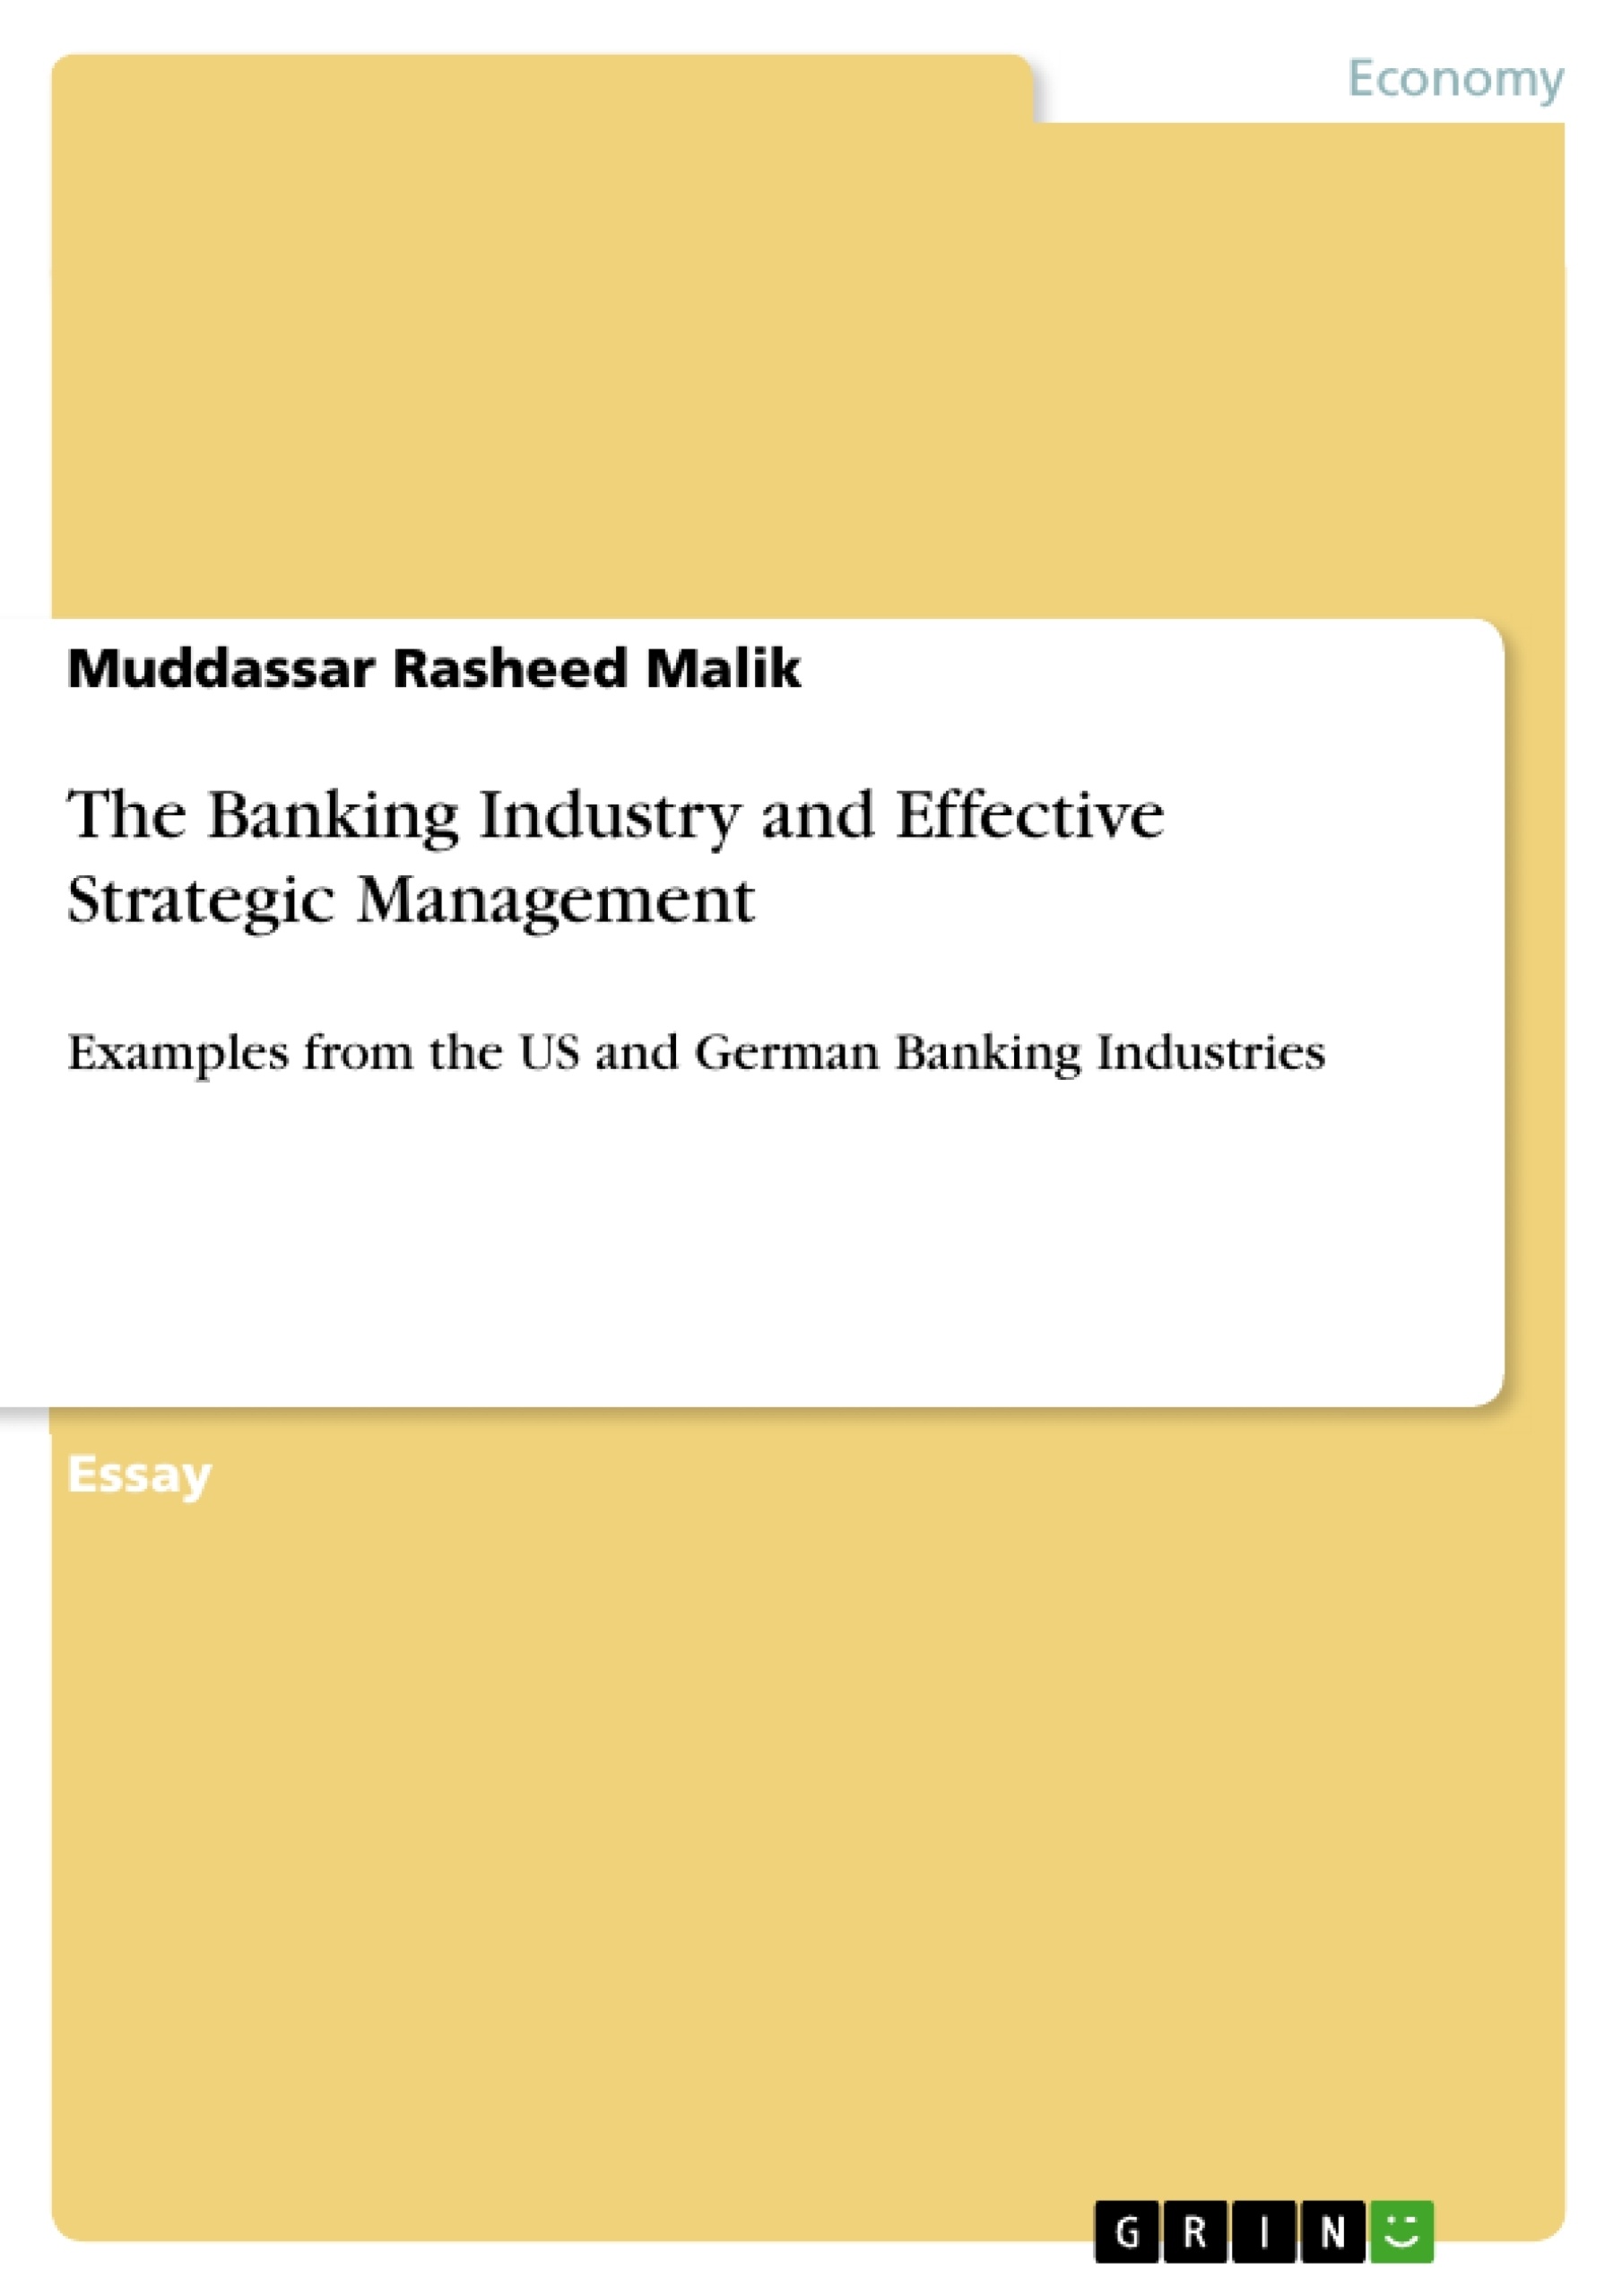 Title: The Banking Industry and Effective Strategic Management